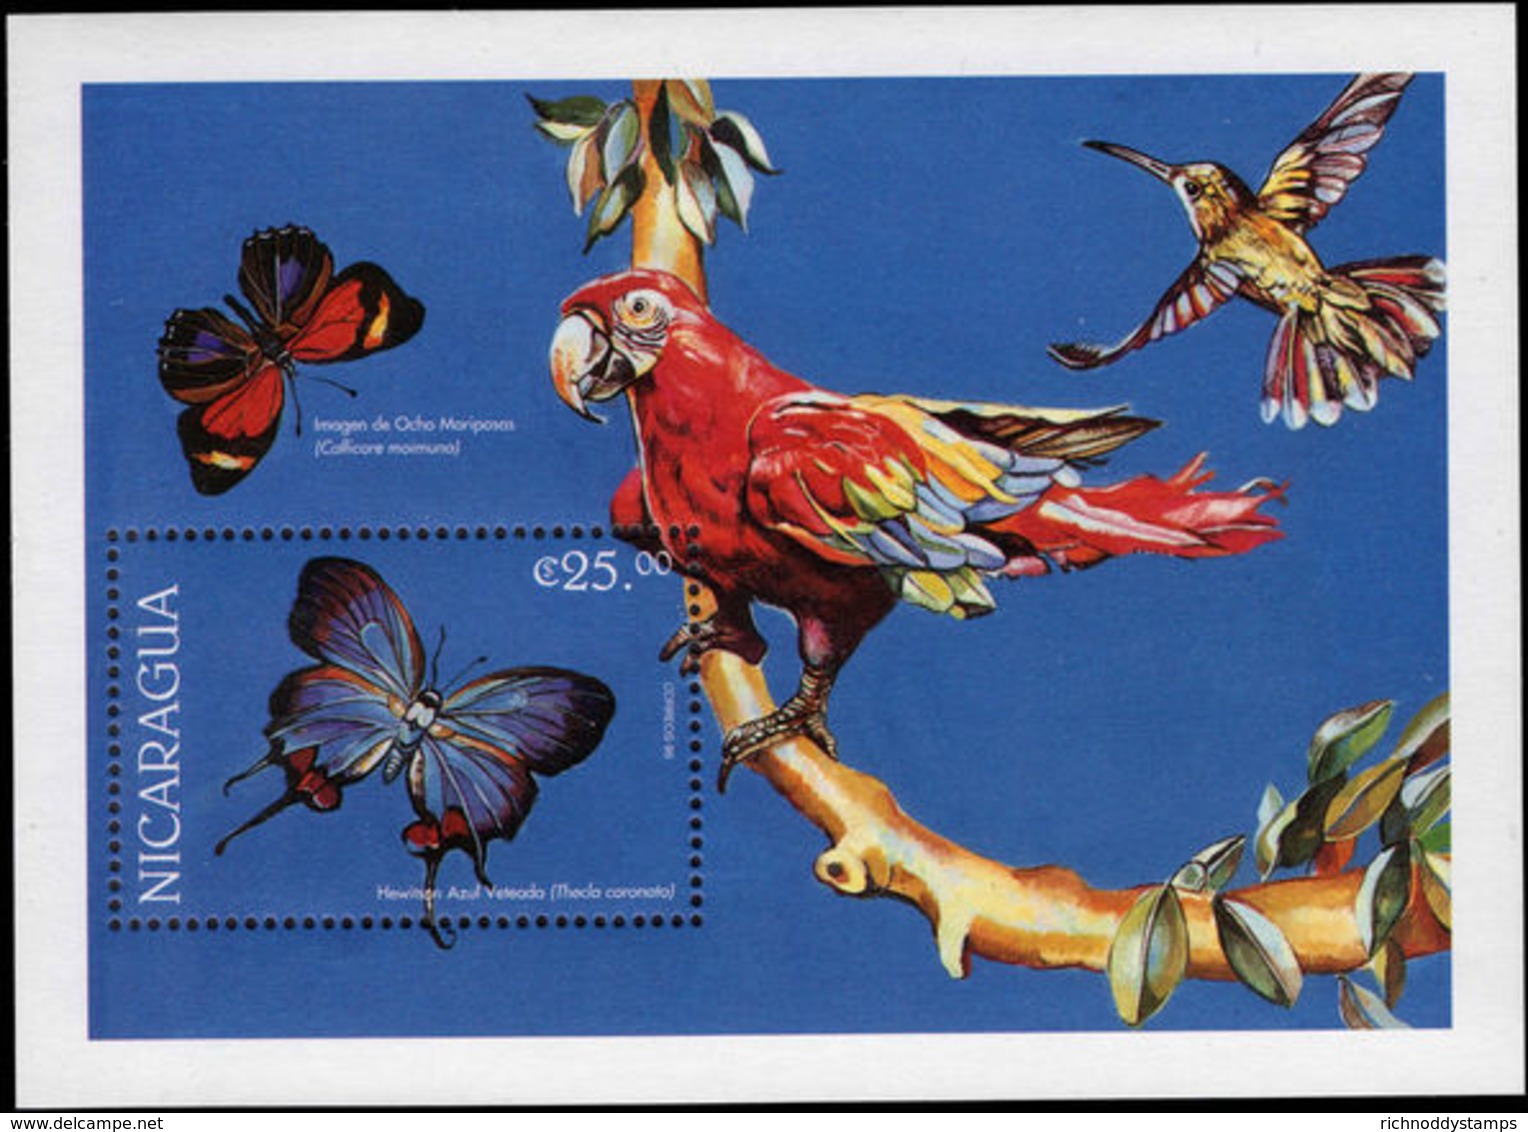 Nicaragua 1999 Butterfly And Scarlet Macaw Souvenir Sheet Unmounted Mint. - Nicaragua